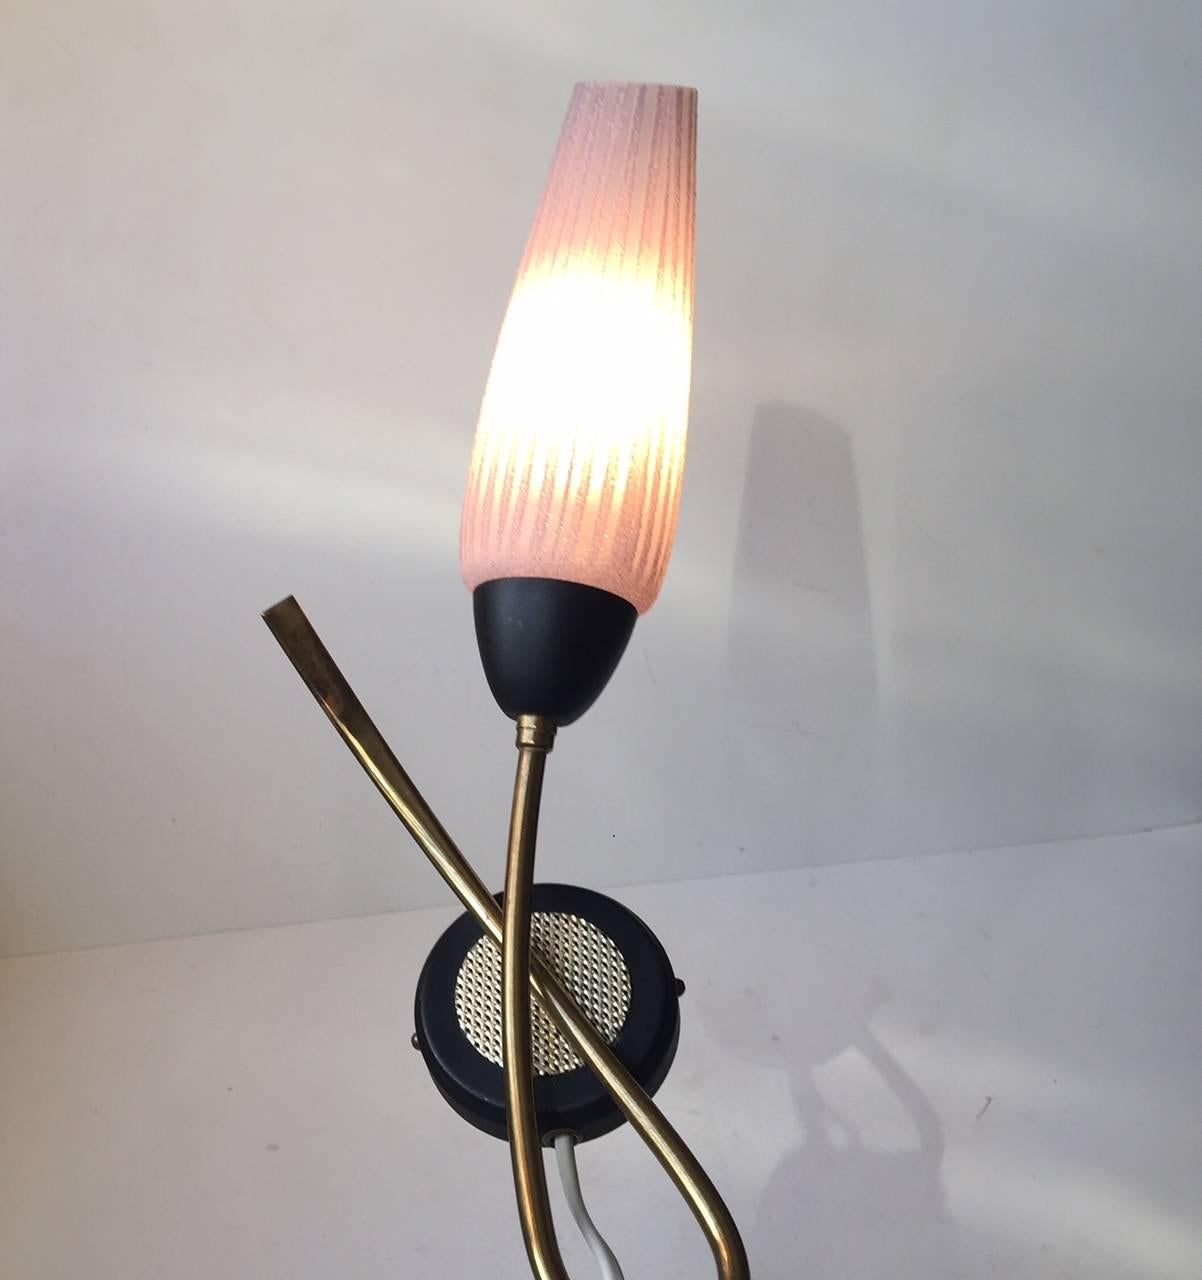 Flower shaped sconce designed in a style reminiscent of Stilnovo and manufactured during the 1950s by Eleltrik in Italy. It is made from brass, matte black powder coated metal and striped purple glass. When lid the shade changes color from purple to